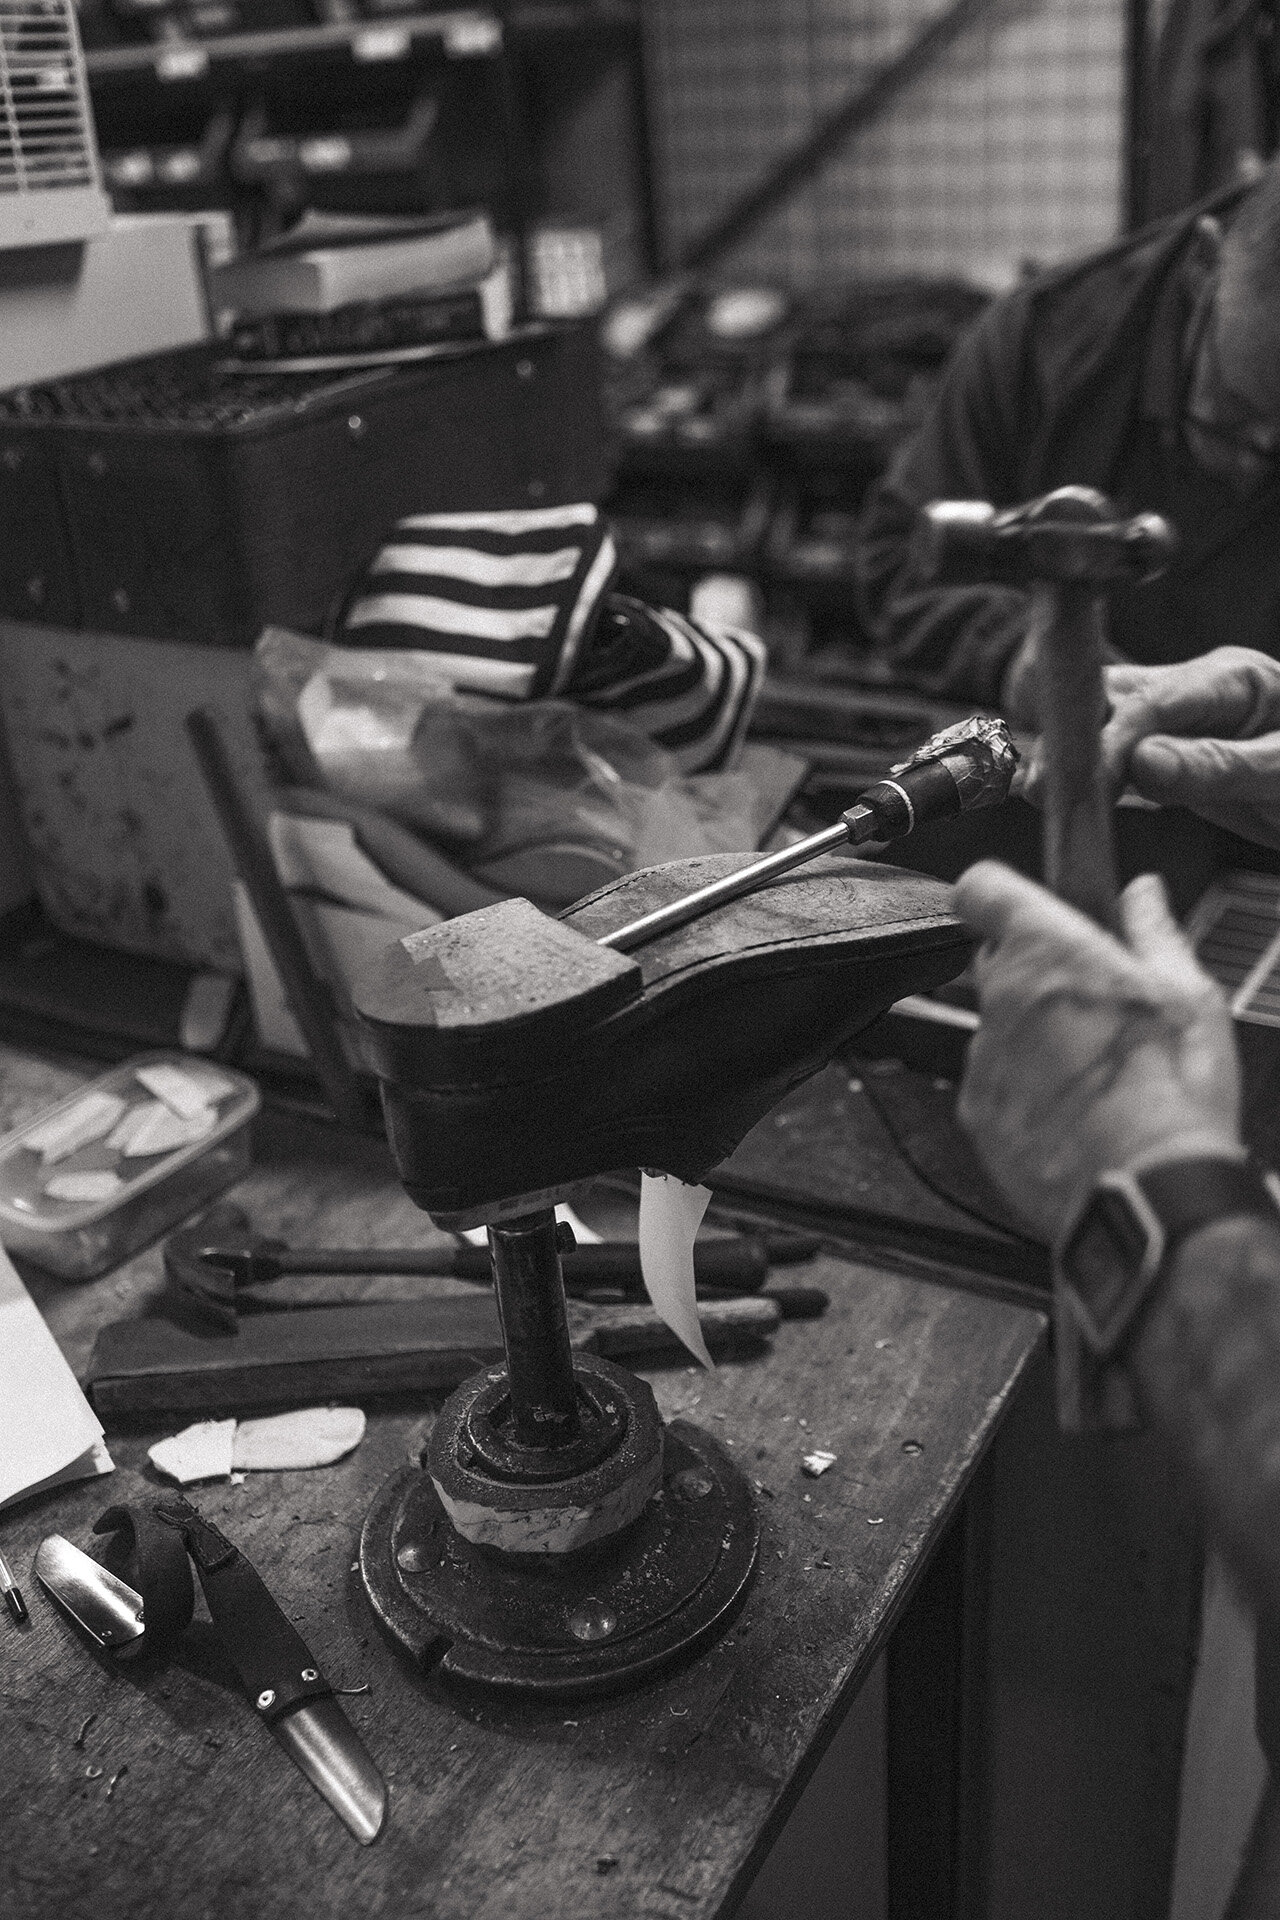 grenson factory seconds